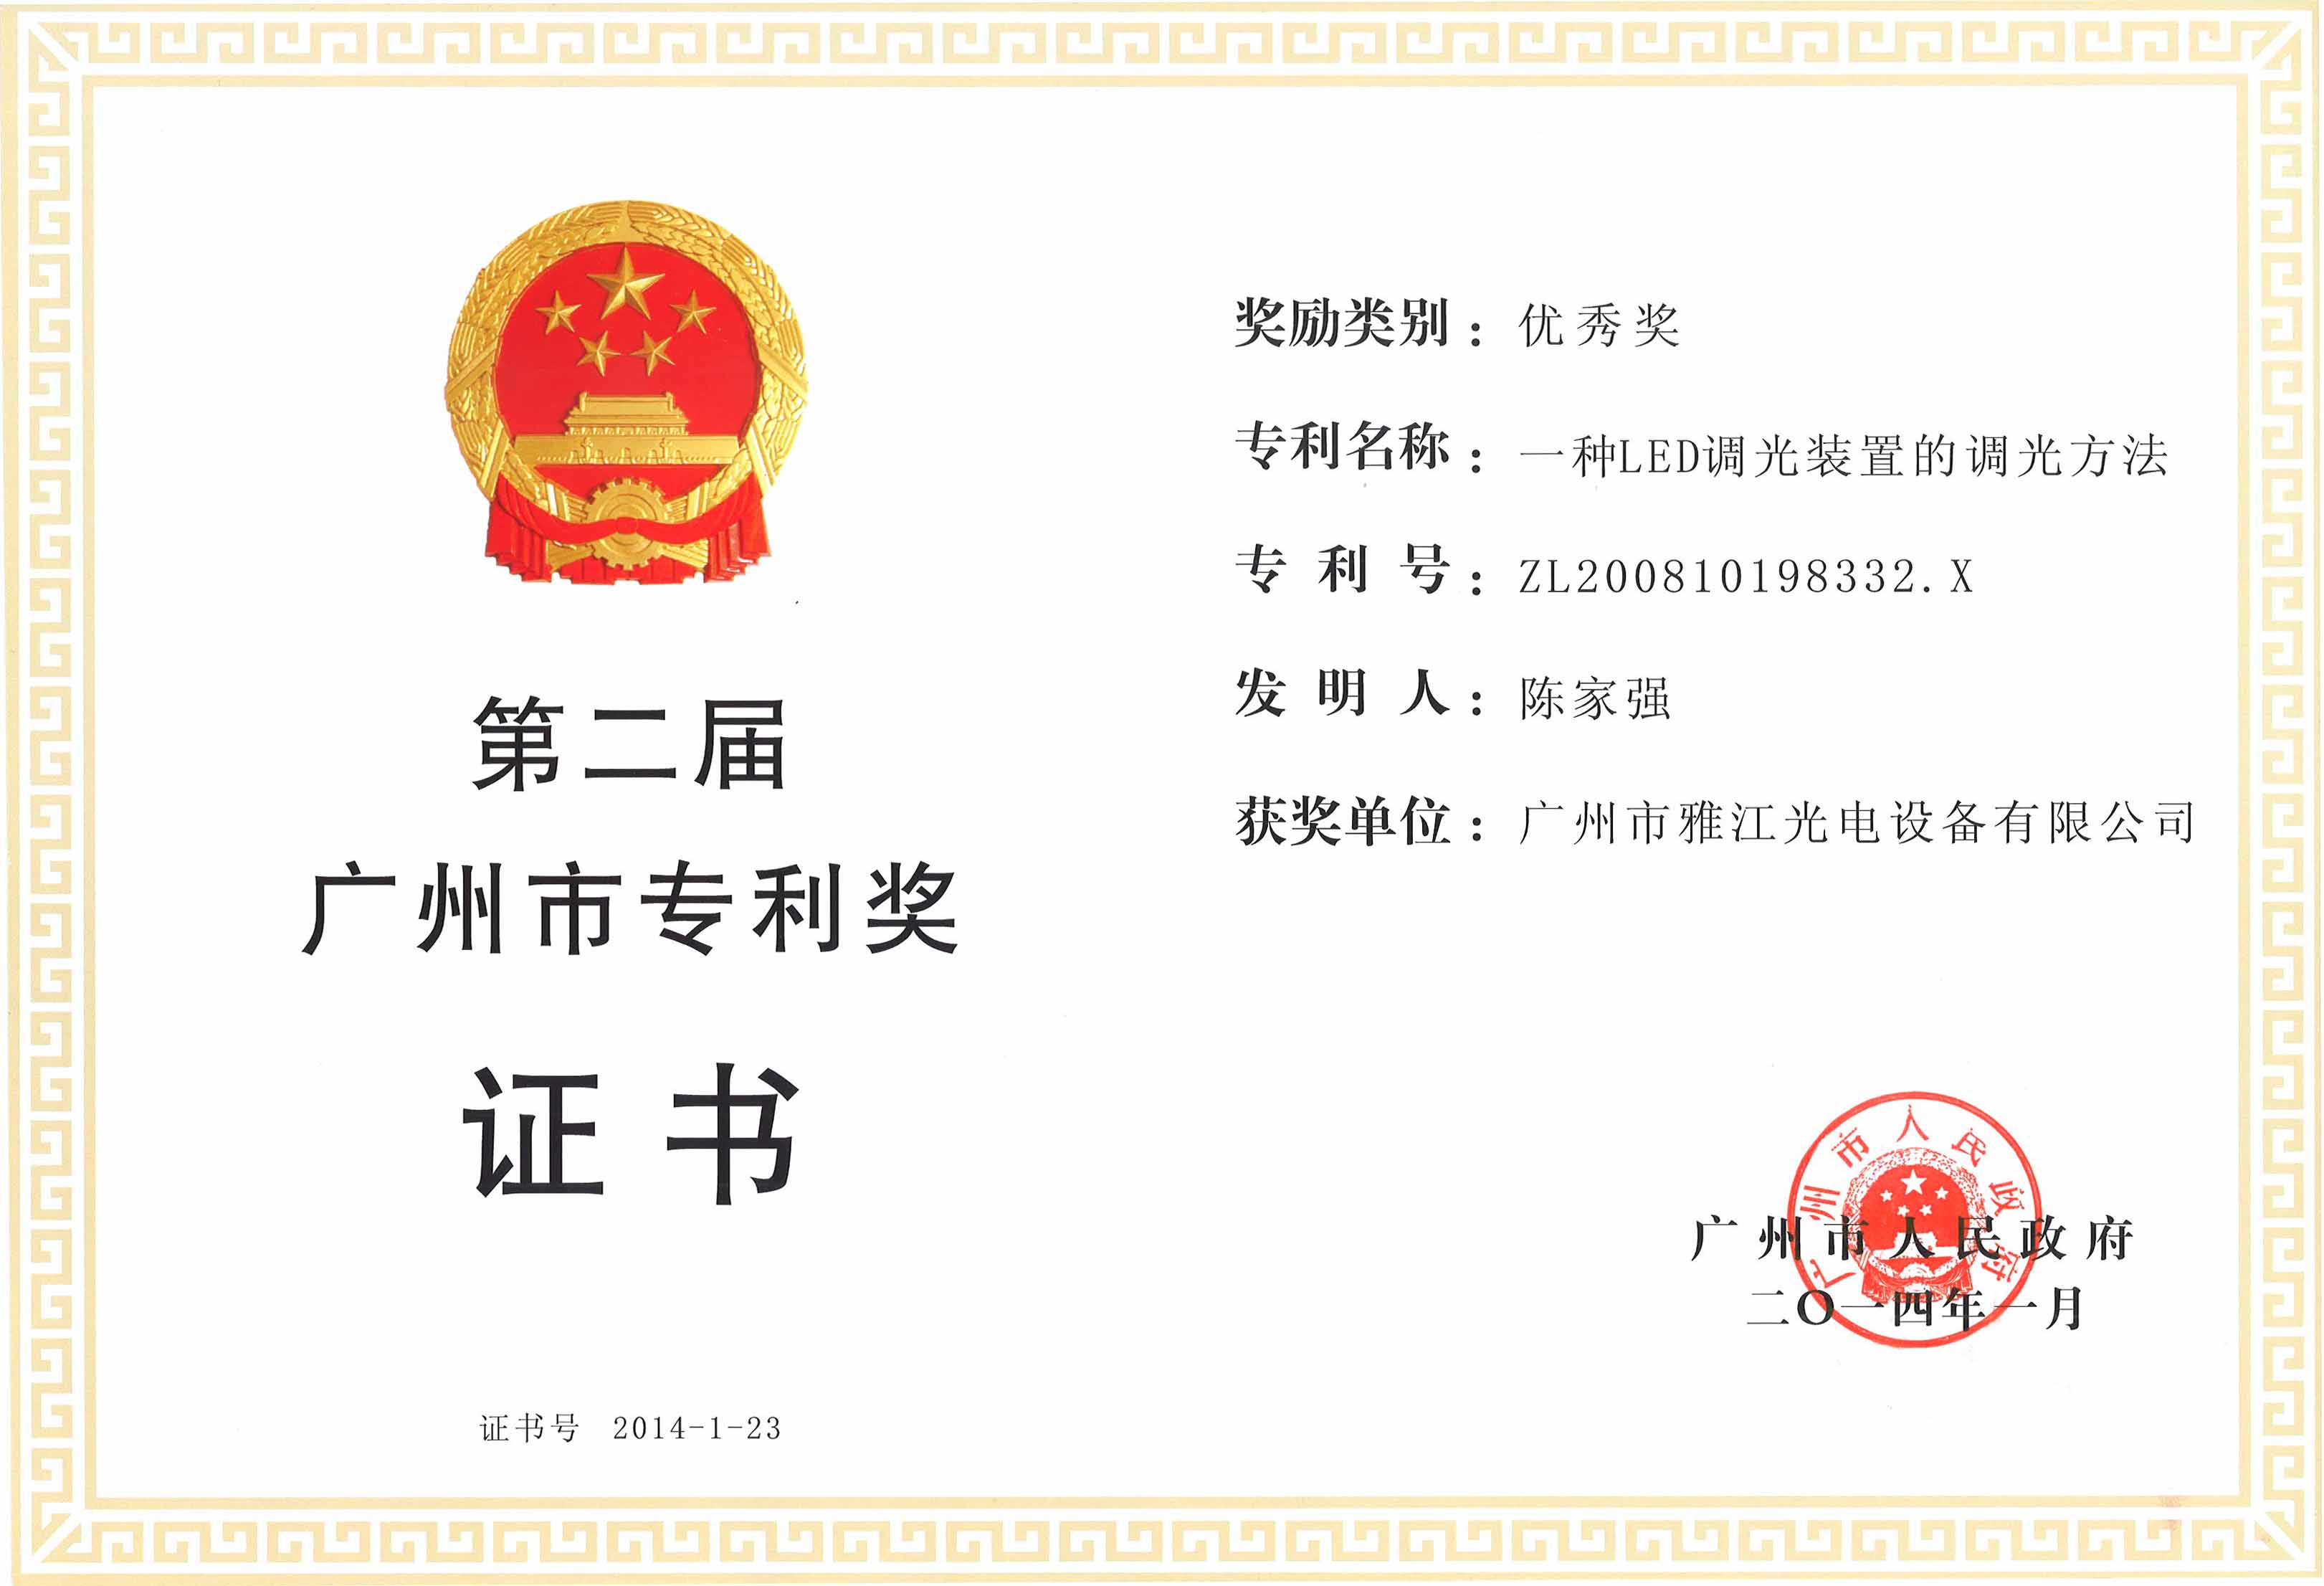 The second Guangzhou Patent Excellence Award